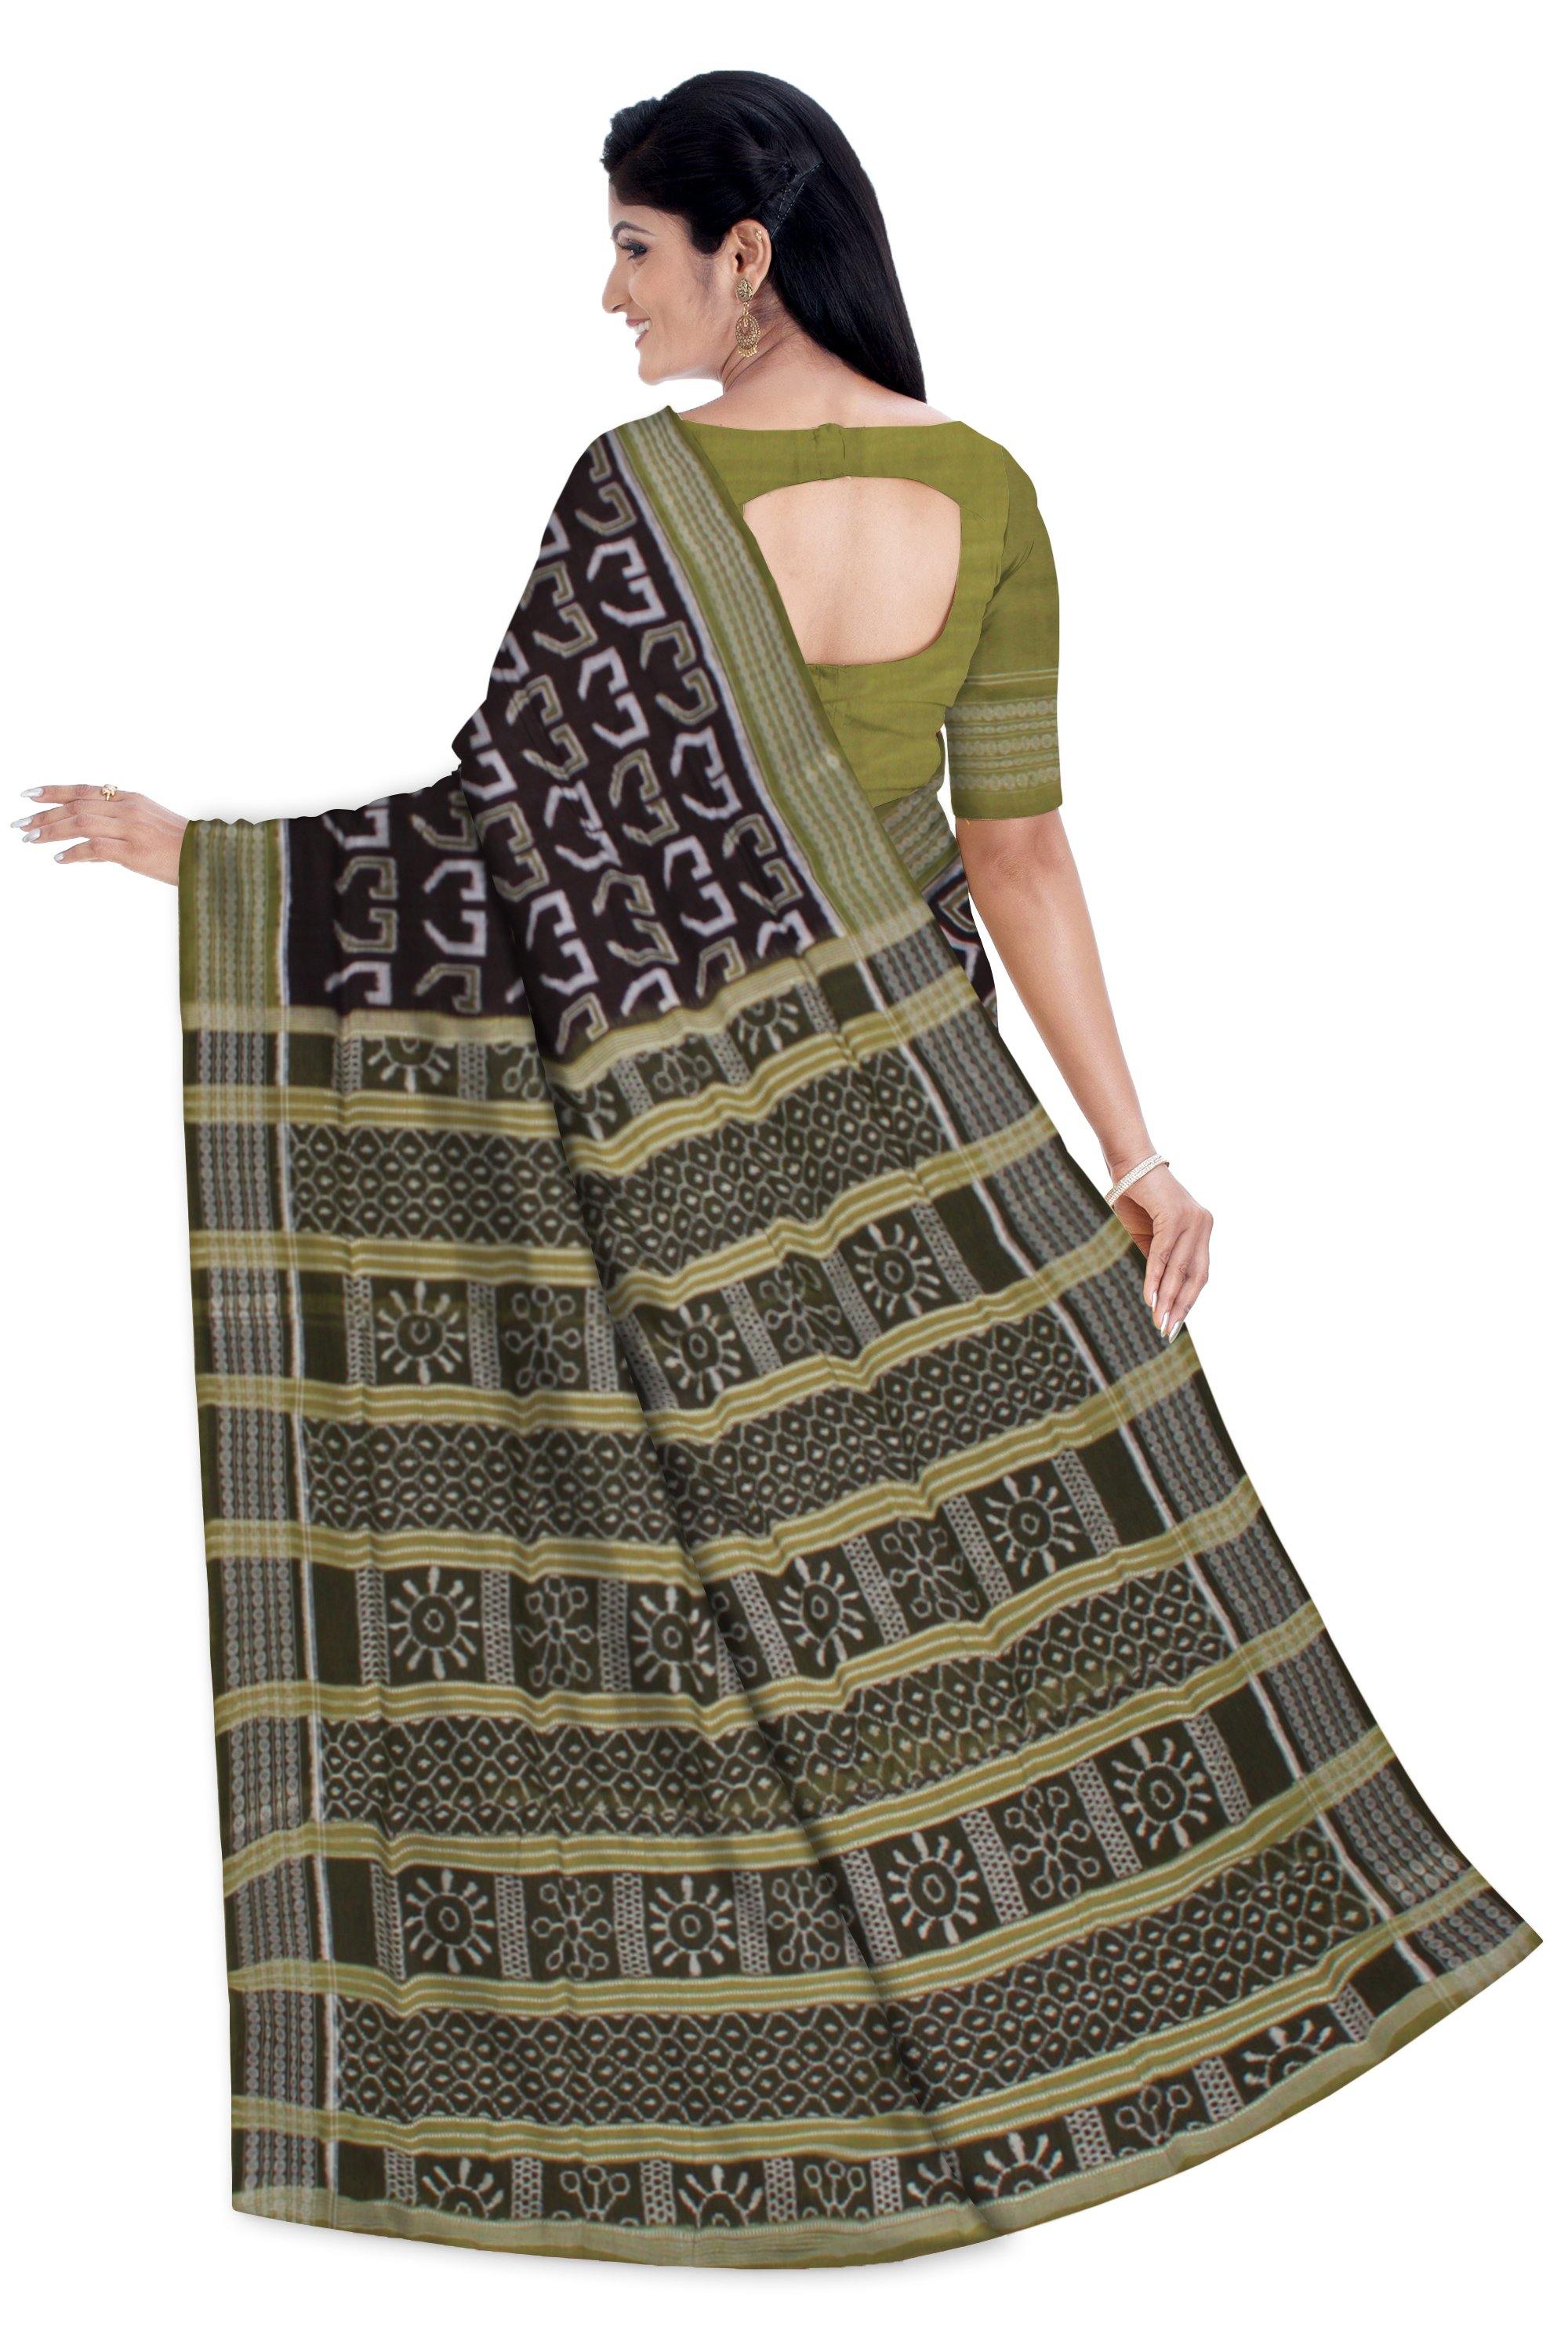 Latest design ikat saree in green and brown color, with blouse piece. - Koshali Arts & Crafts Enterprise